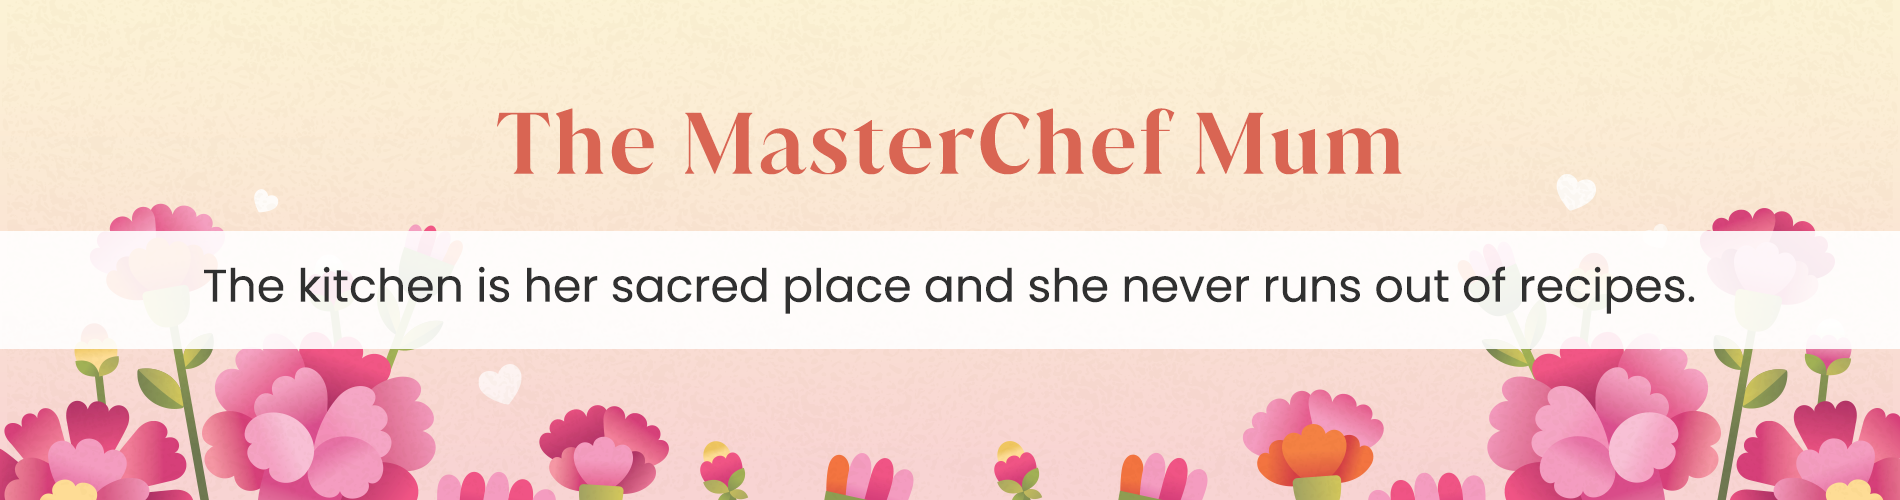 Type4-The MasterChef Mum.png__PID:6ad000e5-3766-4bee-bc8c-7be25b4b6ade